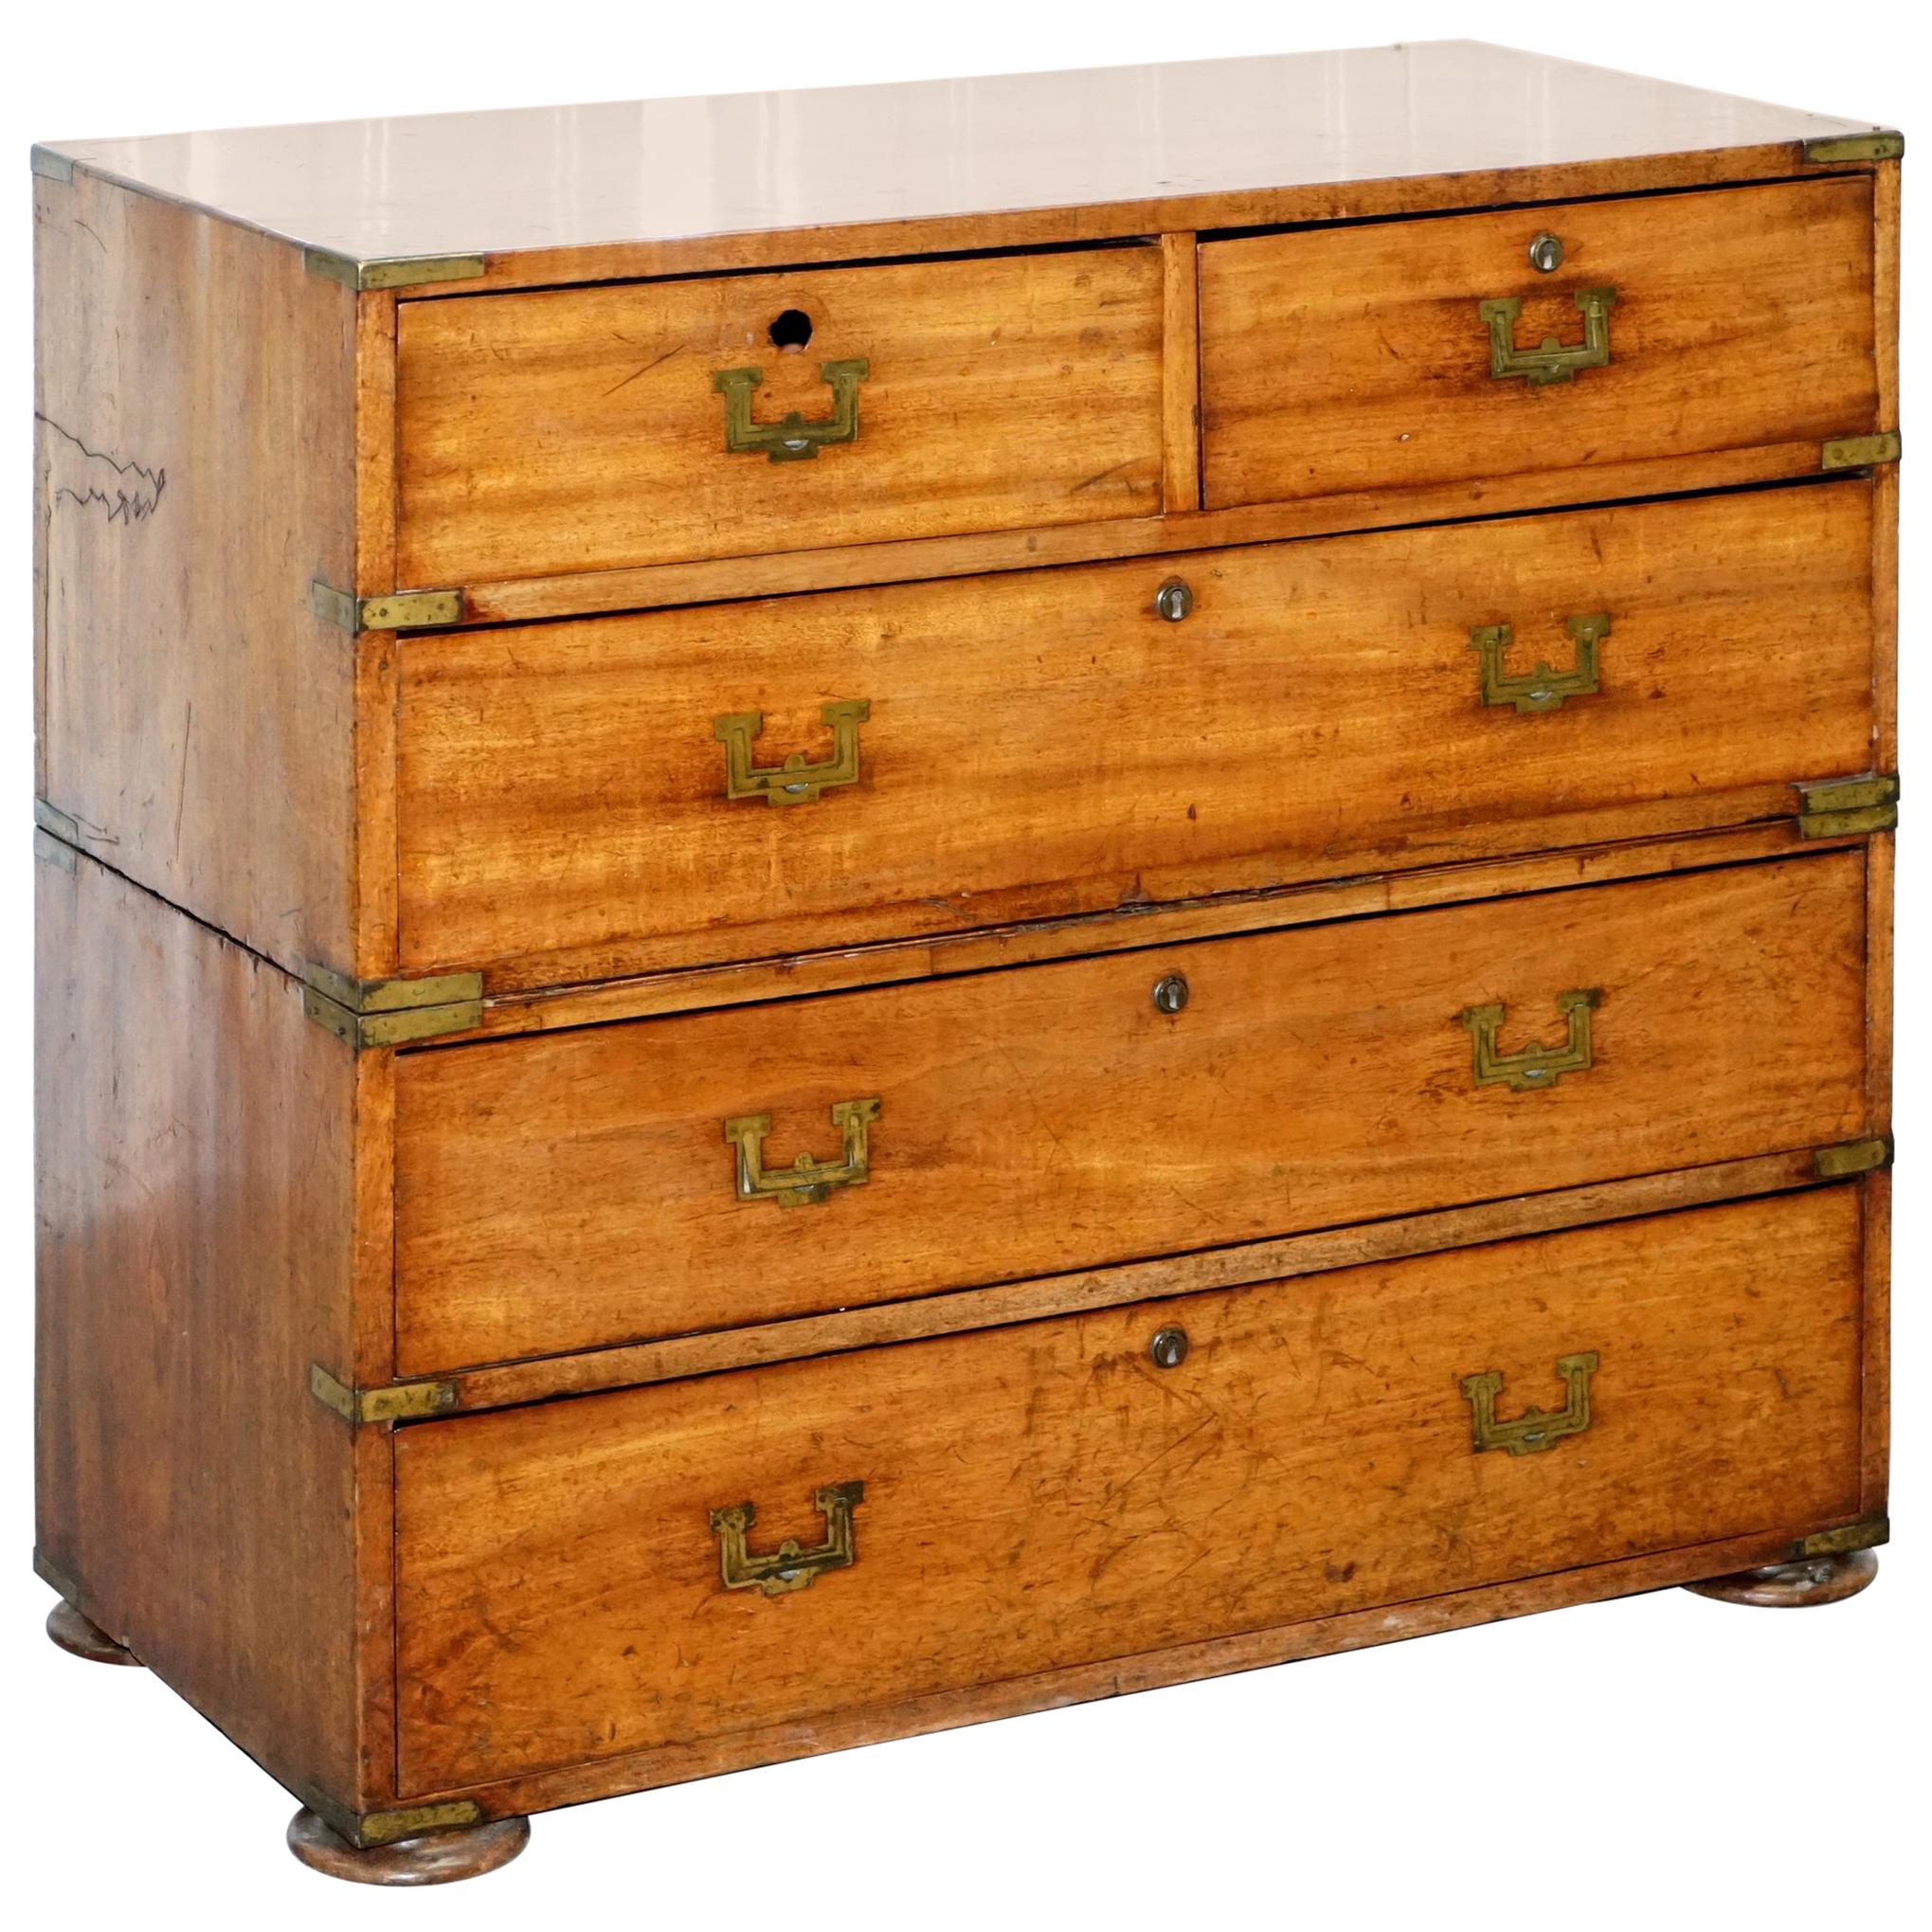 Rare Original 10th February 1813 Uk Napoleonic War Campaign Chest of Drawers